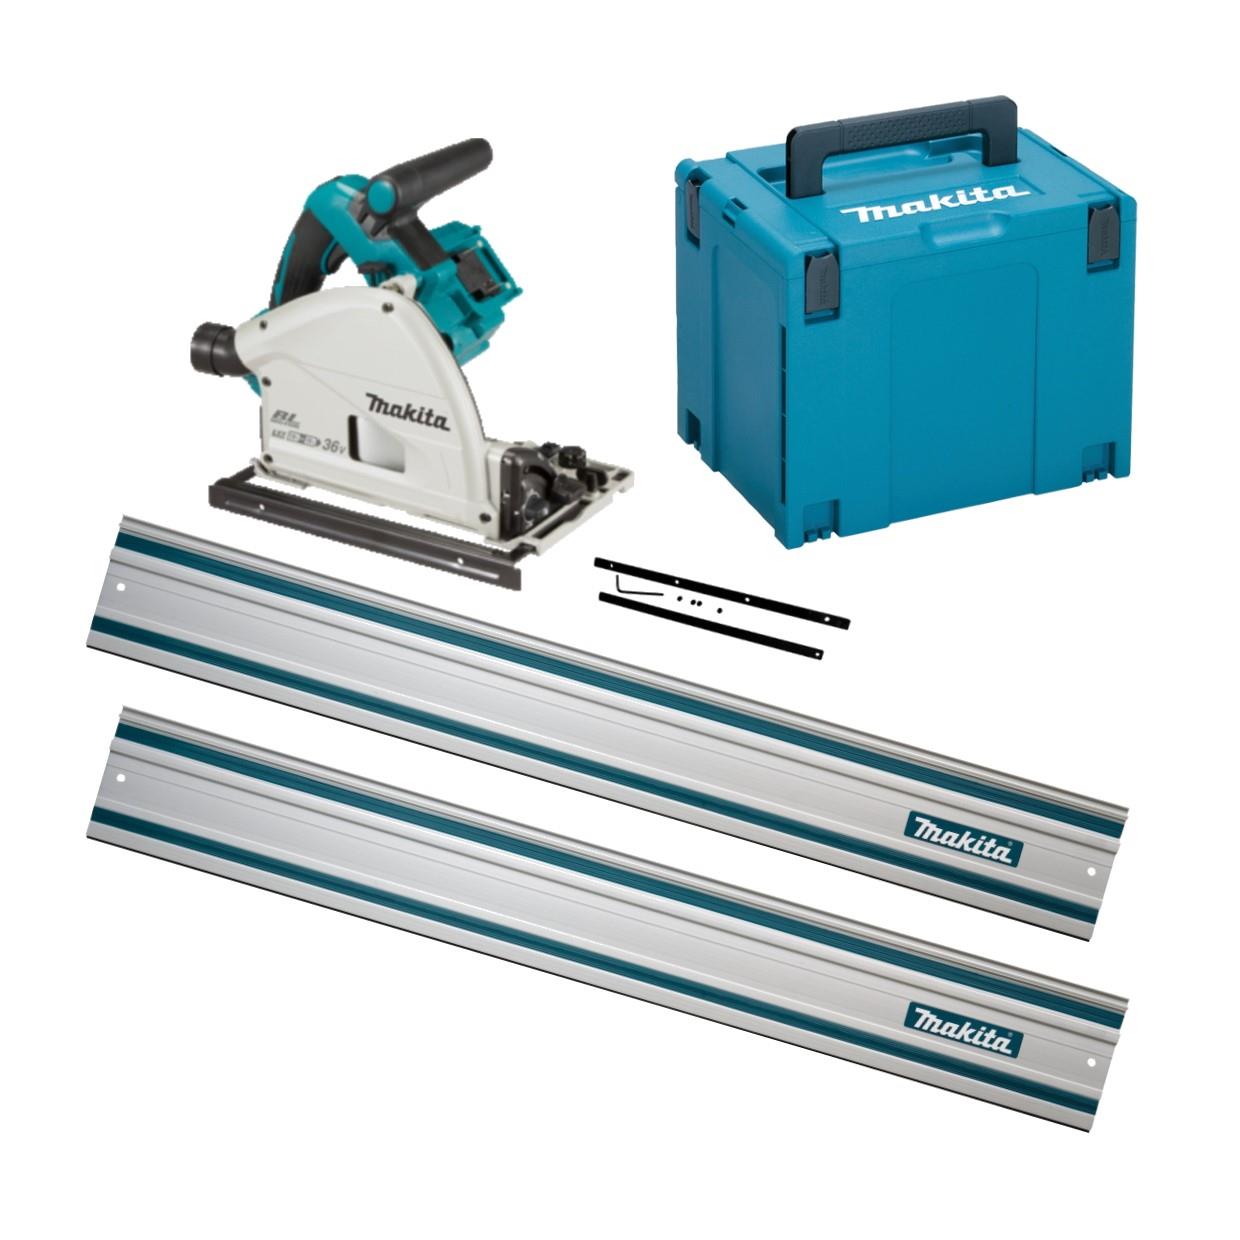 Makita DSP600ZJ Twin 18 Volt Cordless Plunge Saw; Brushless; 2 x 199141-8 1500mm Plunge Saw Guide Rails; 1 x 198885-7 Rail Connector Set